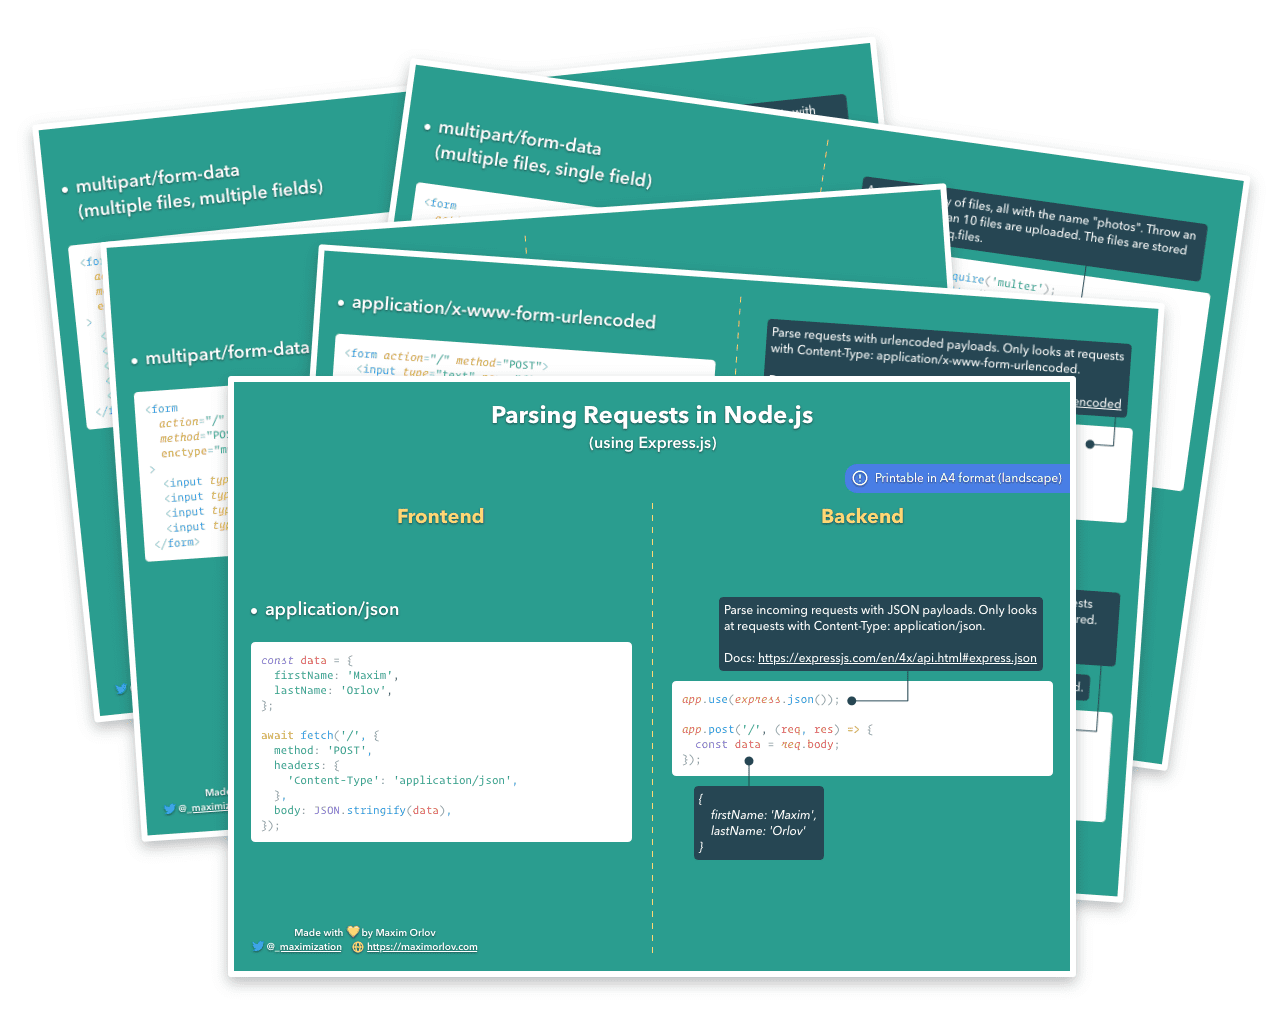 5 thumbnail images of the pages inside the Request Parsing in Node.js Guide. It covers frontend and backend examples of the most common Content-Type requests.